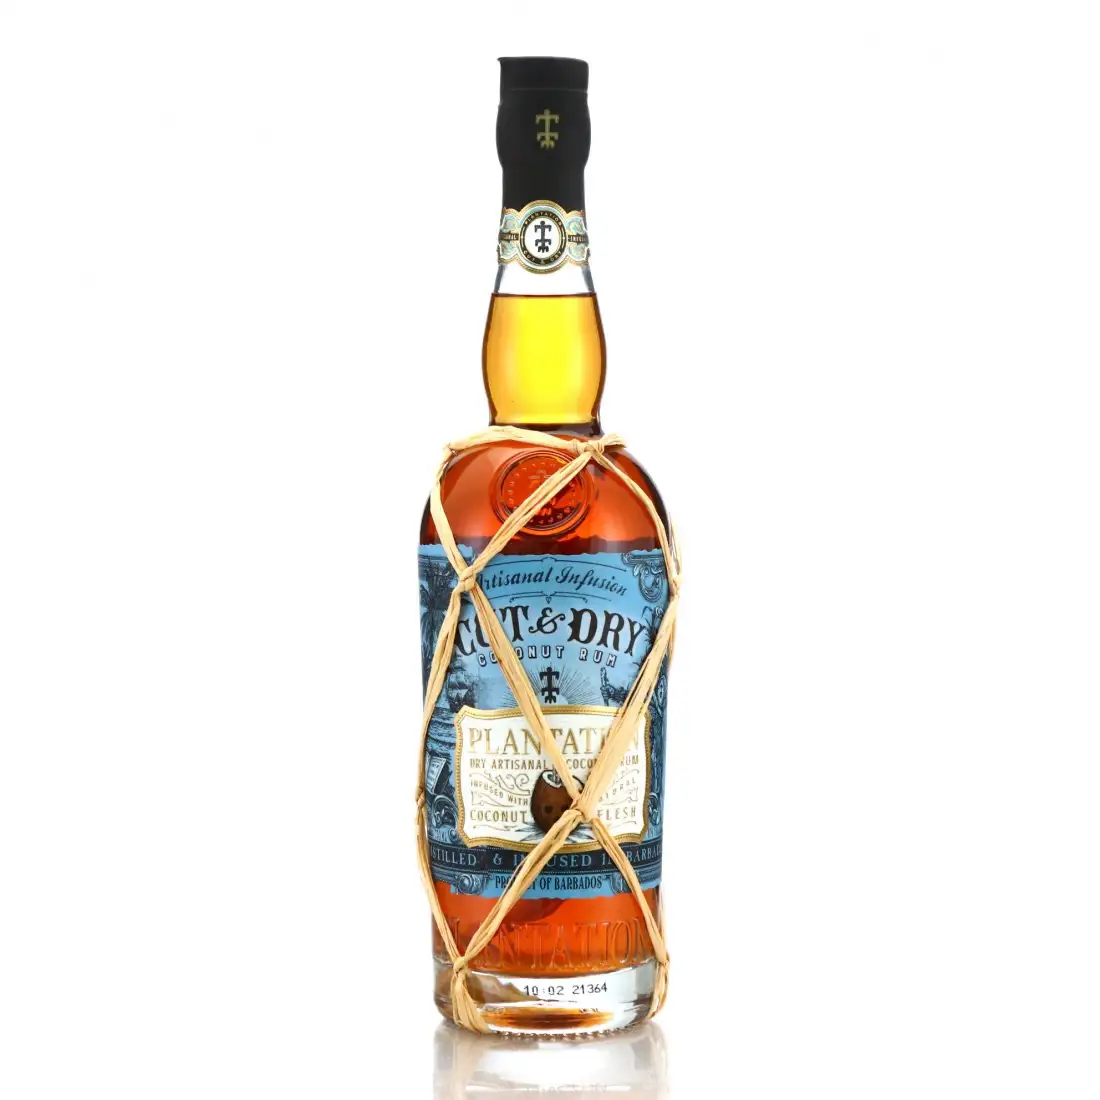 Image of the front of the bottle of the rum Plantation Cut and Dry Coconut Rum